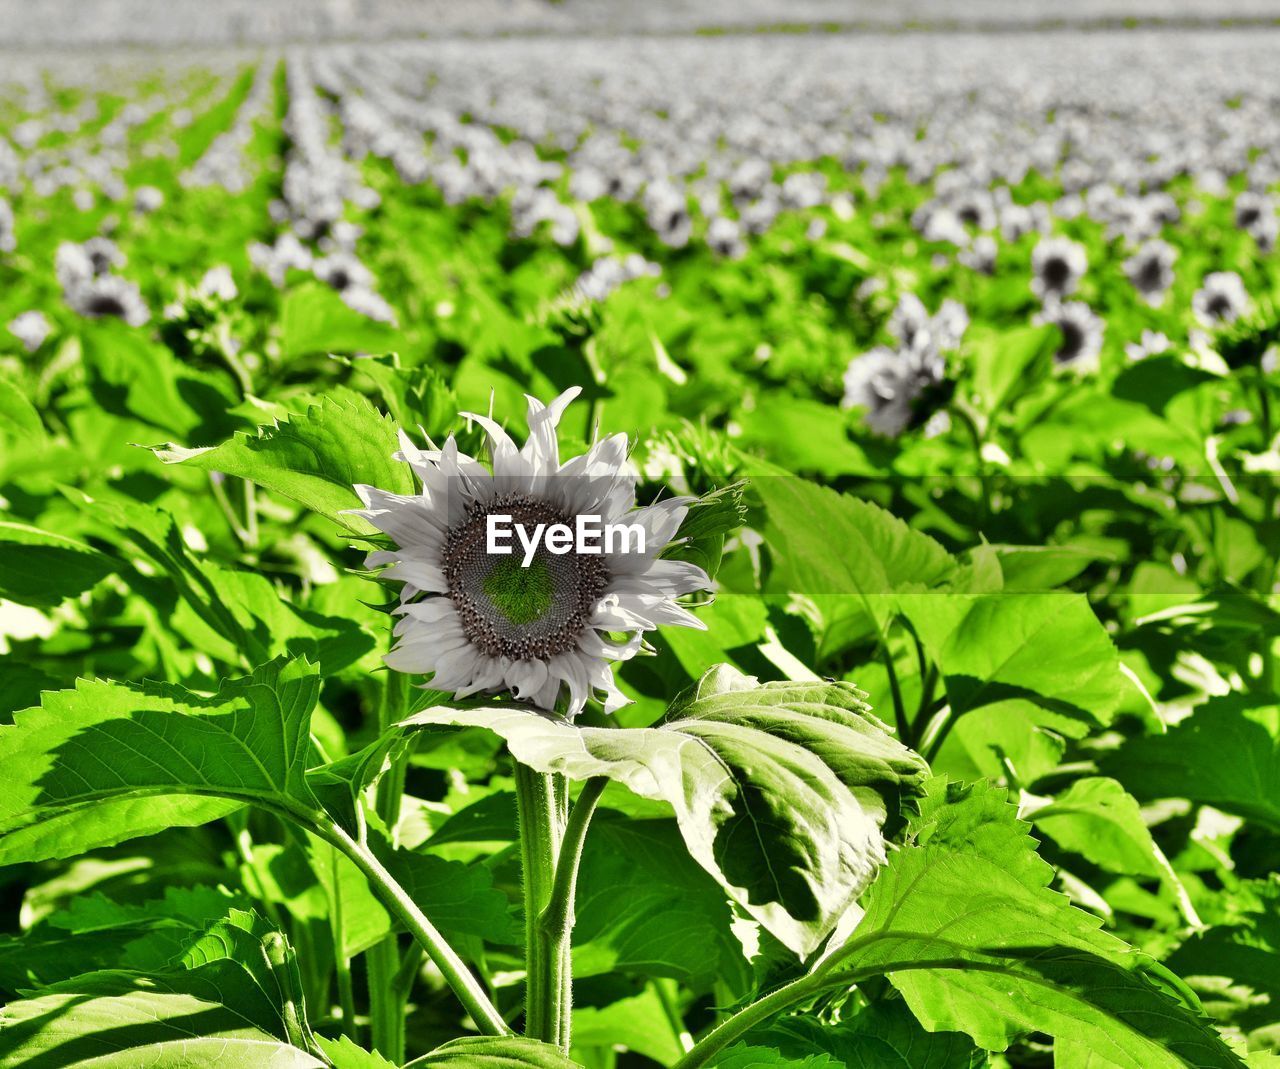 CLOSE-UP OF FLOWERS BLOOMING IN FIELD